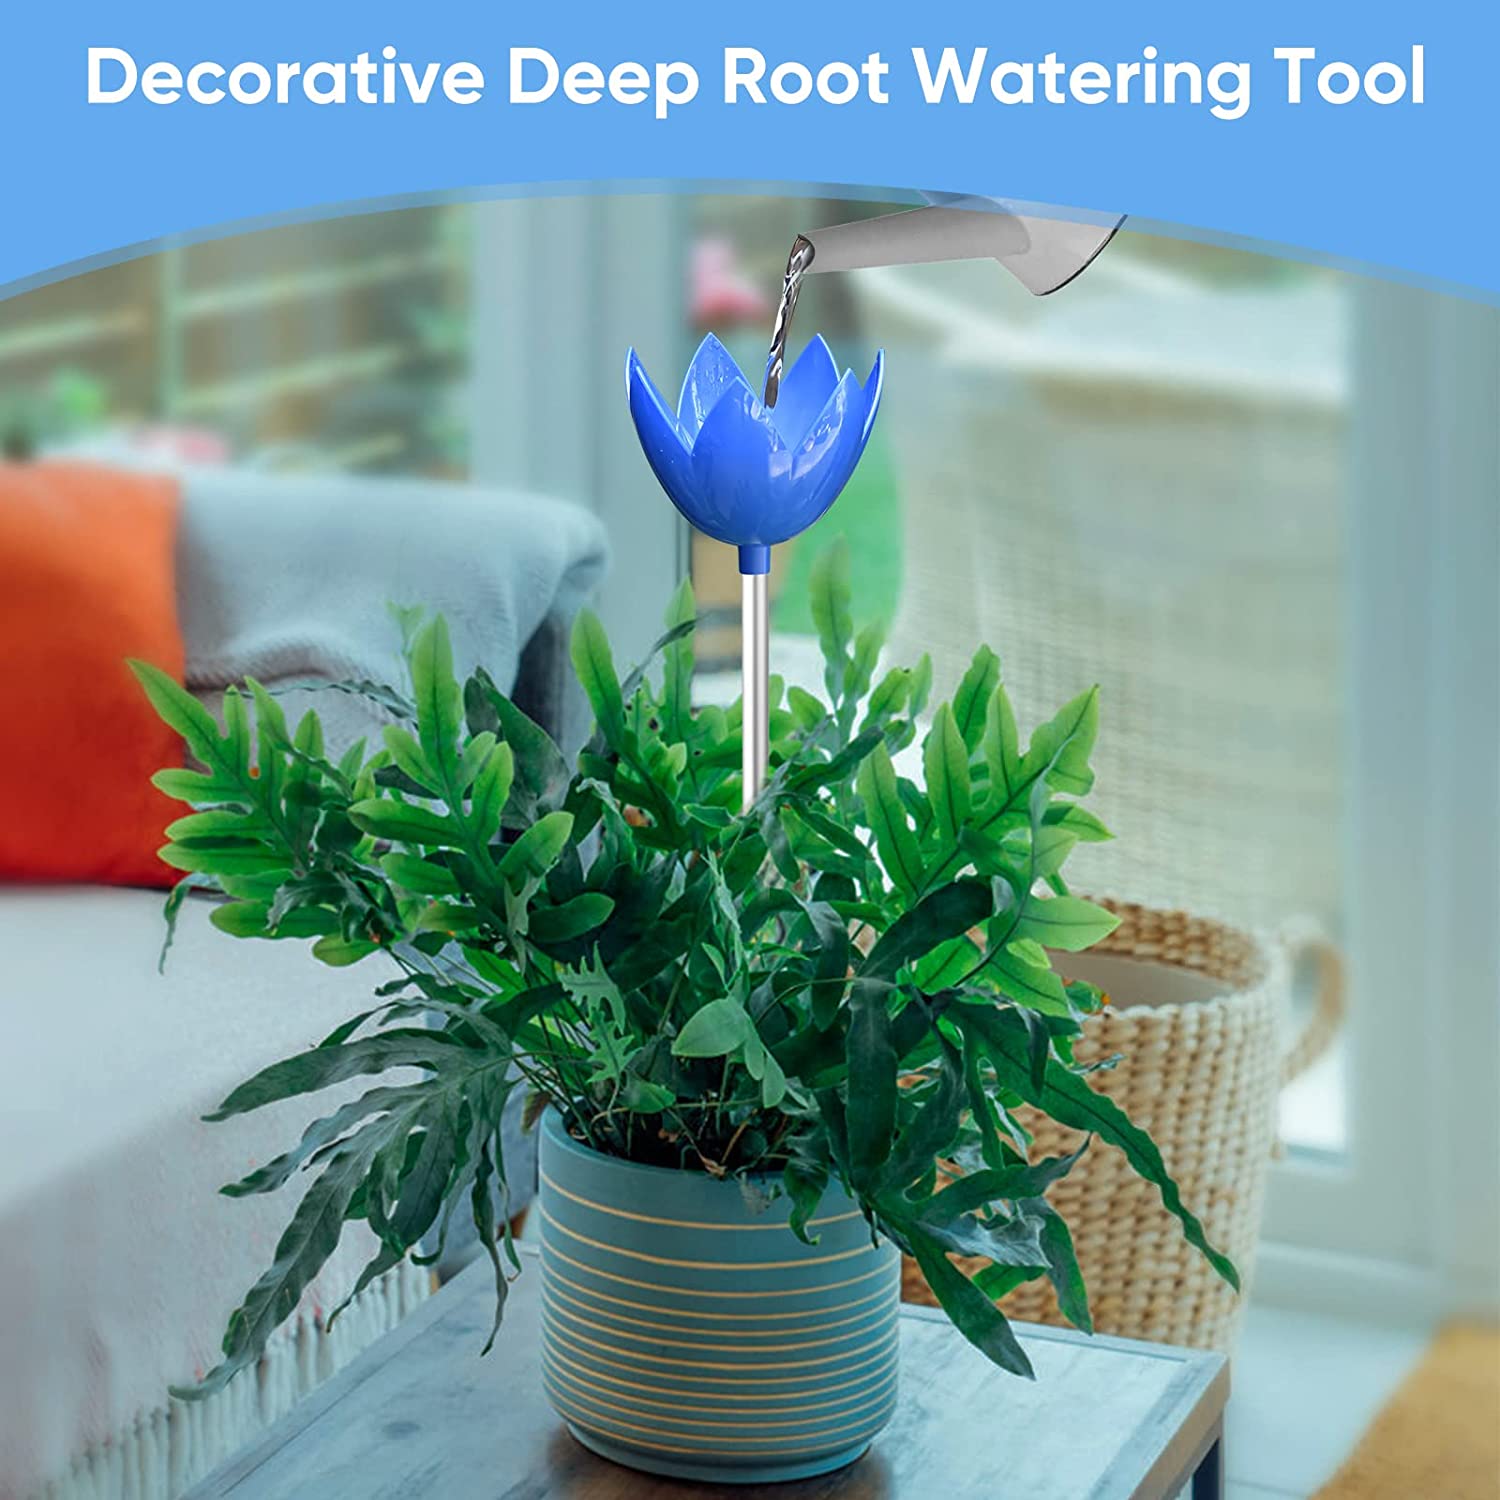 Decorative Deep Root Watering Tool,Root Watering Spike DACK Root Waterer for Gardeners,Ideal for Efficiently Watering Your Tree Garden Patio Container